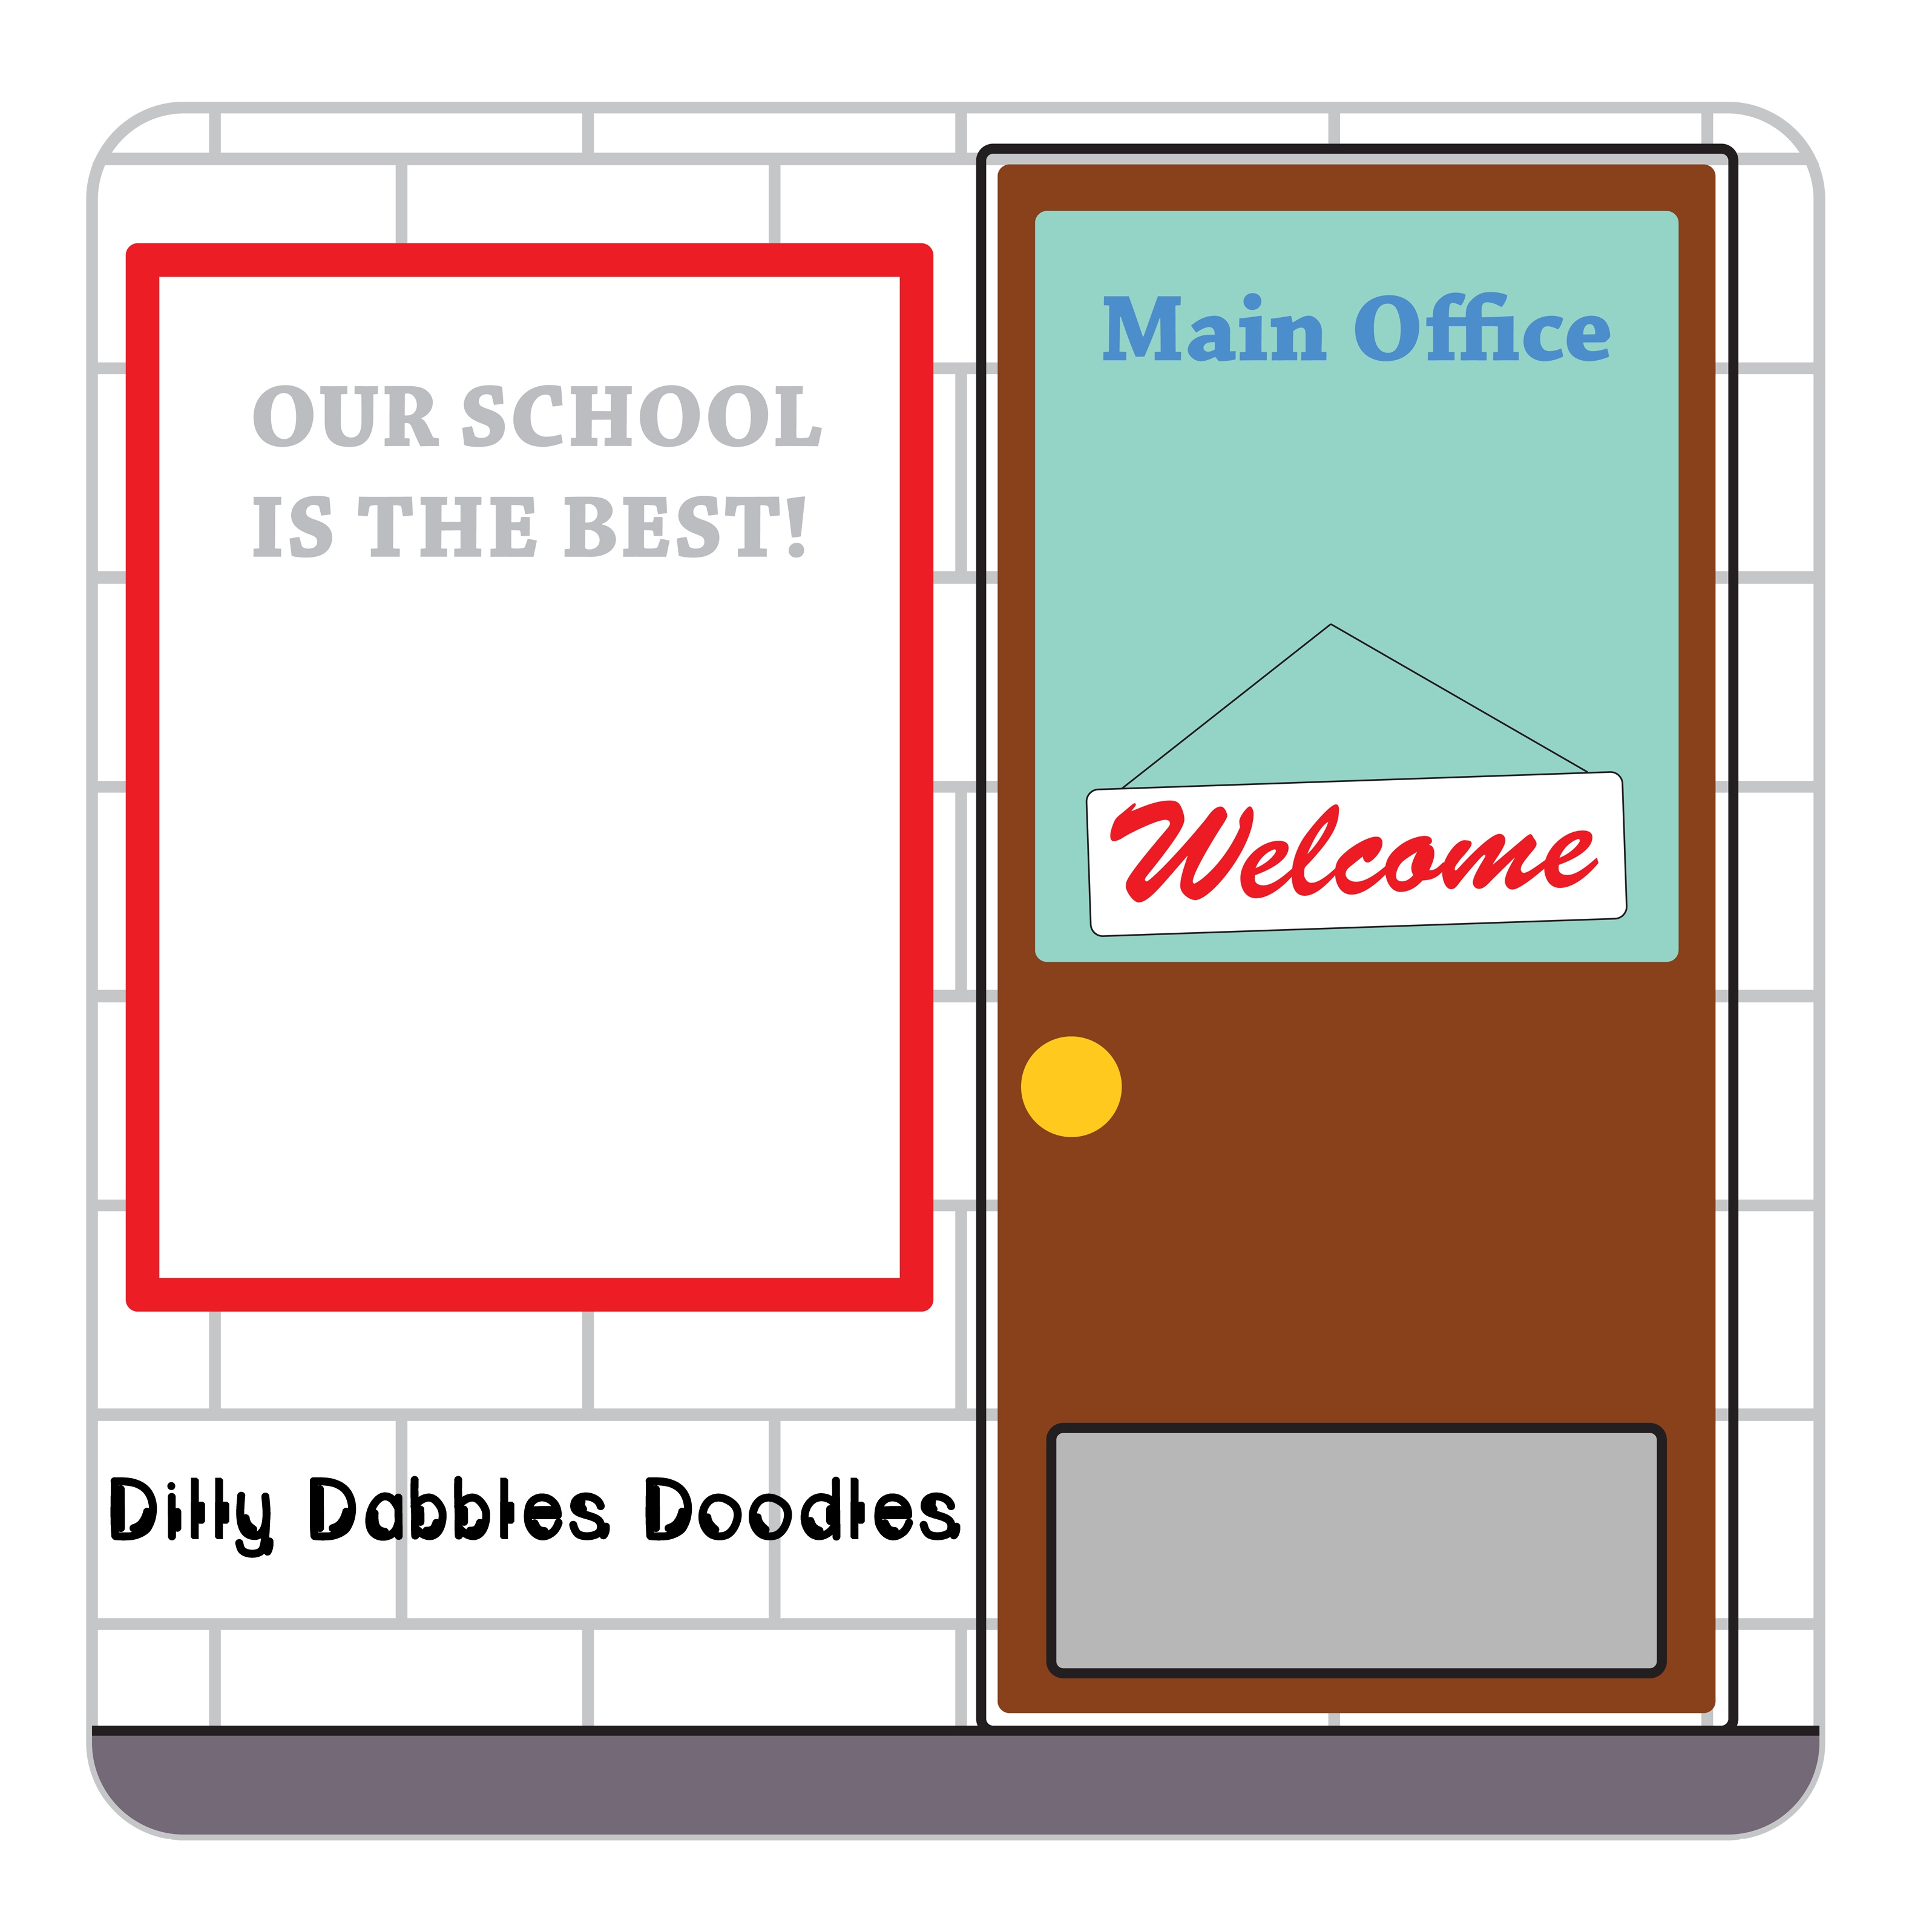 School office clipart images